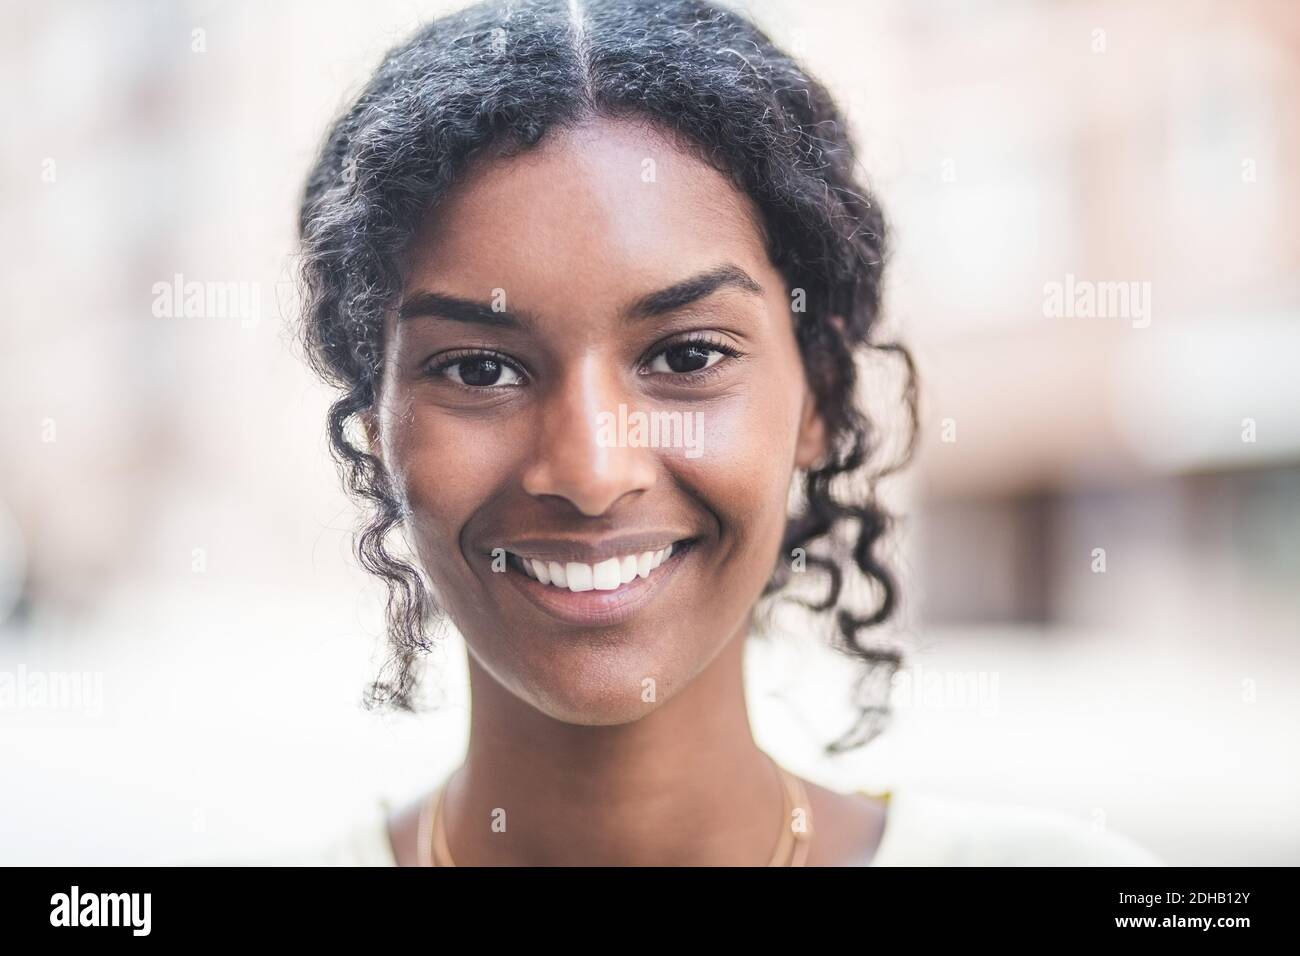 Portrait of smiling young woman in city Banque D'Images